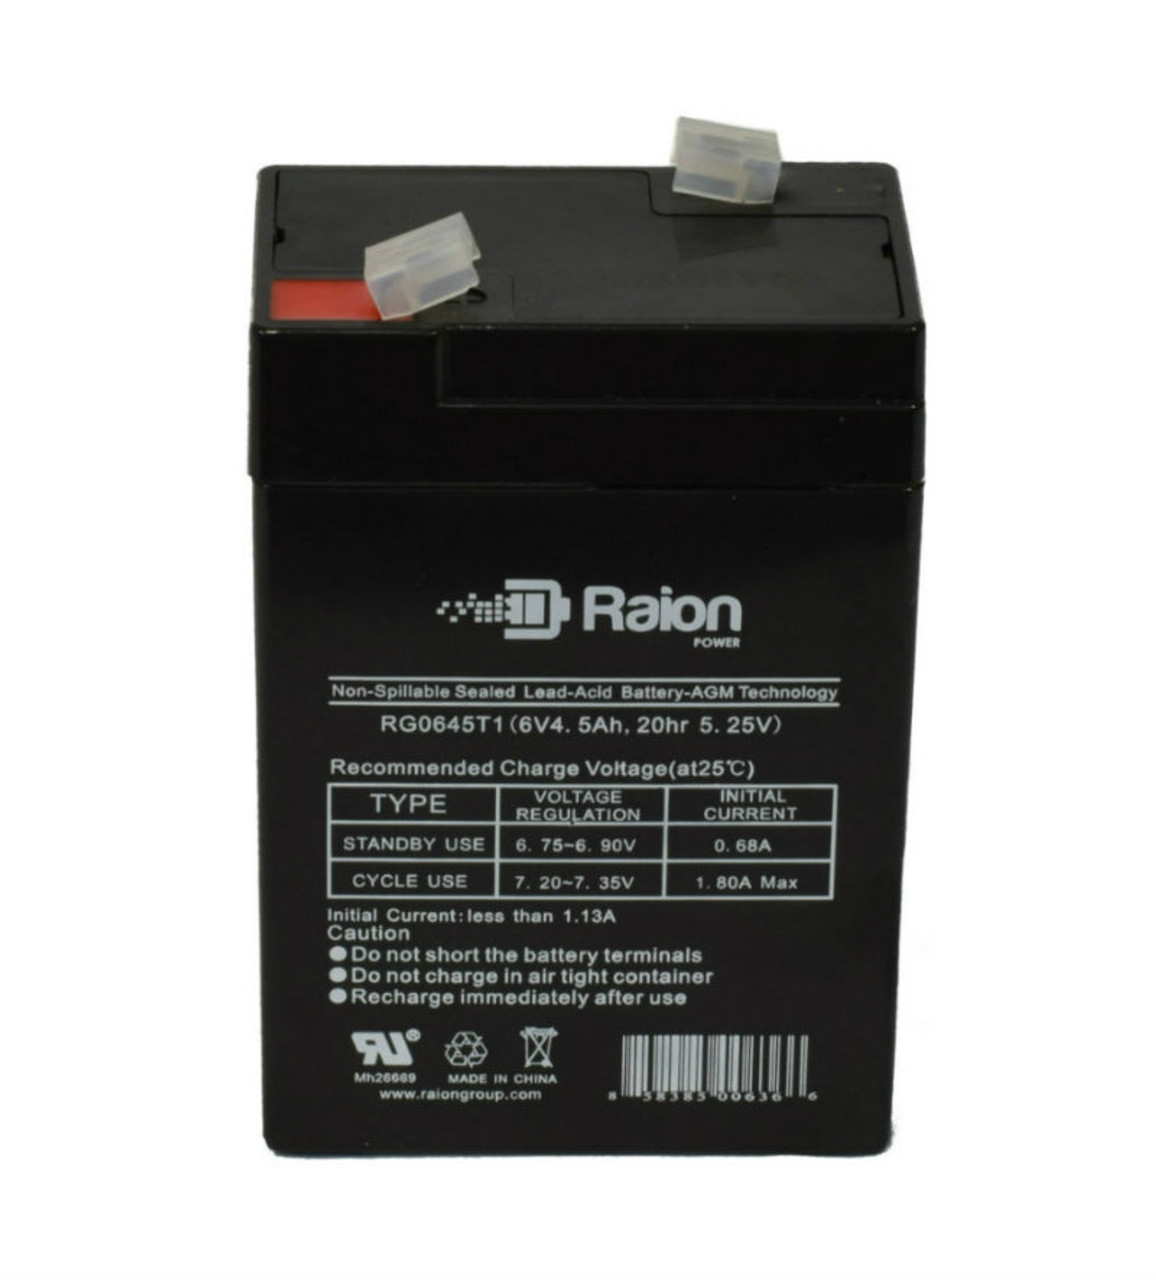 Raion Power RG0645T1 Replacement Battery Cartridge for Lithonia 6ELM2